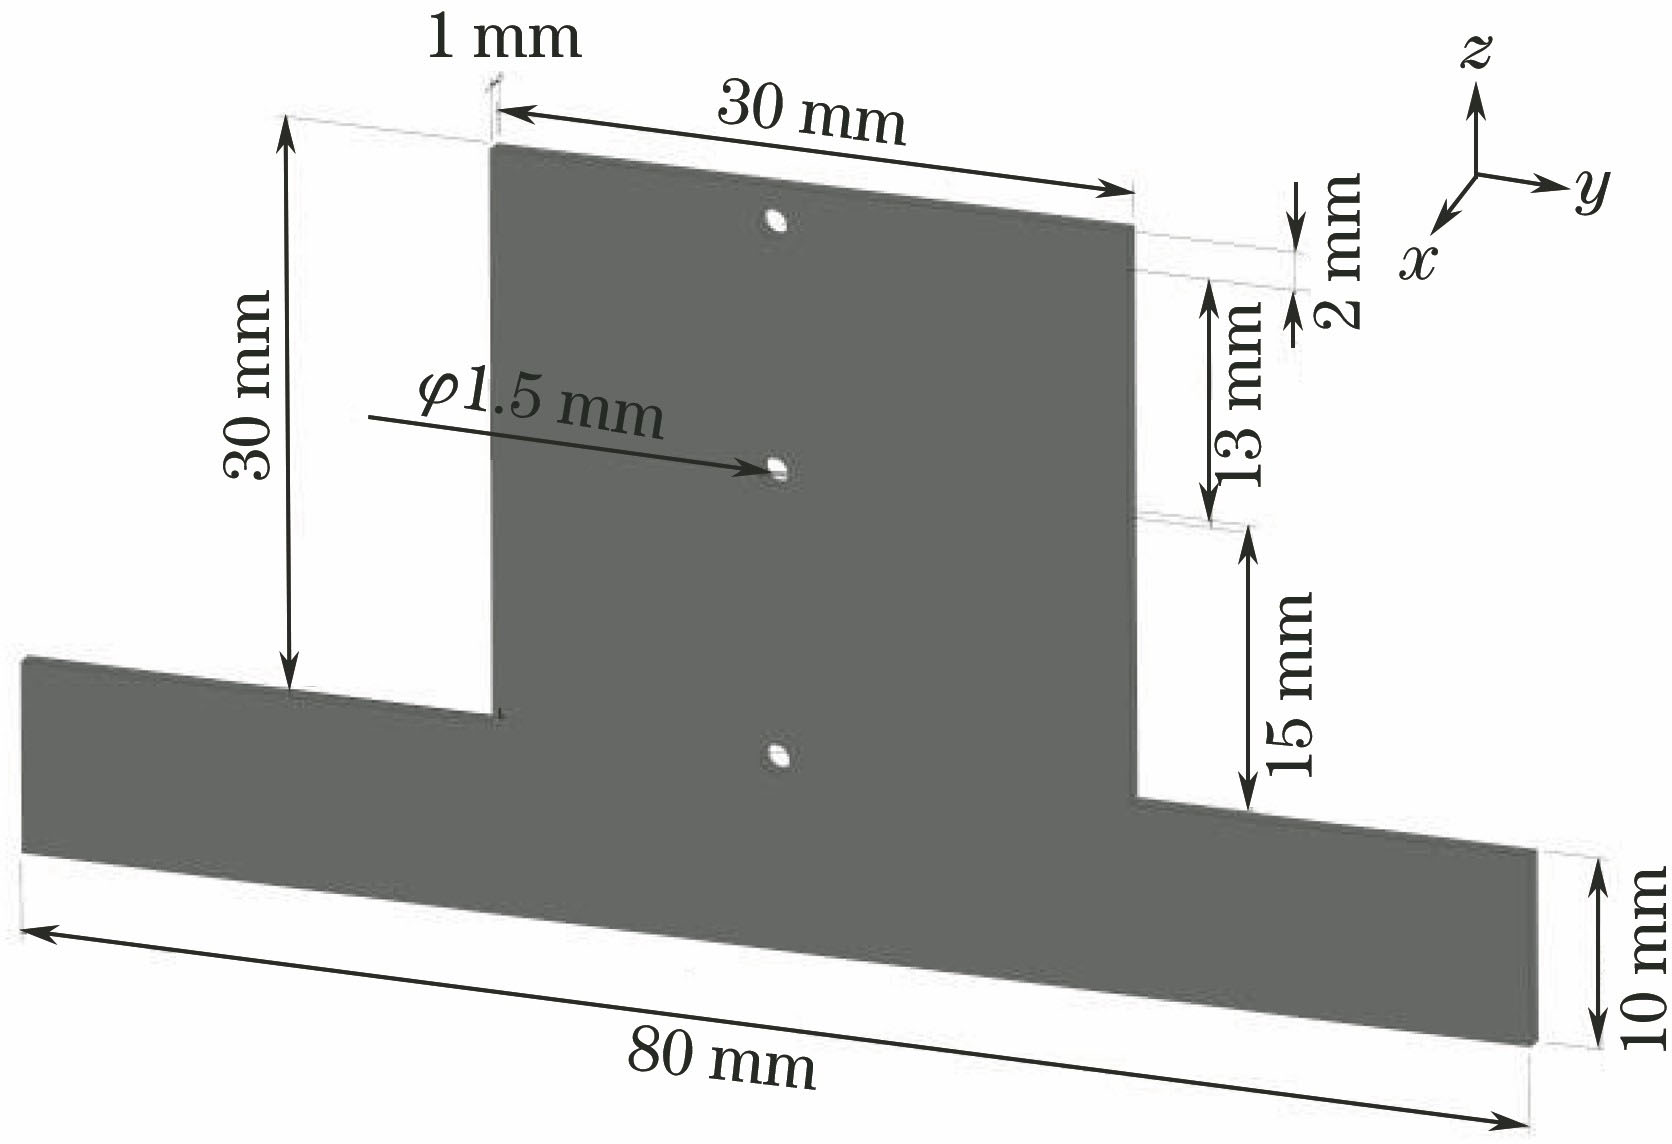 Schematic of dimension and shape of sample to be tested